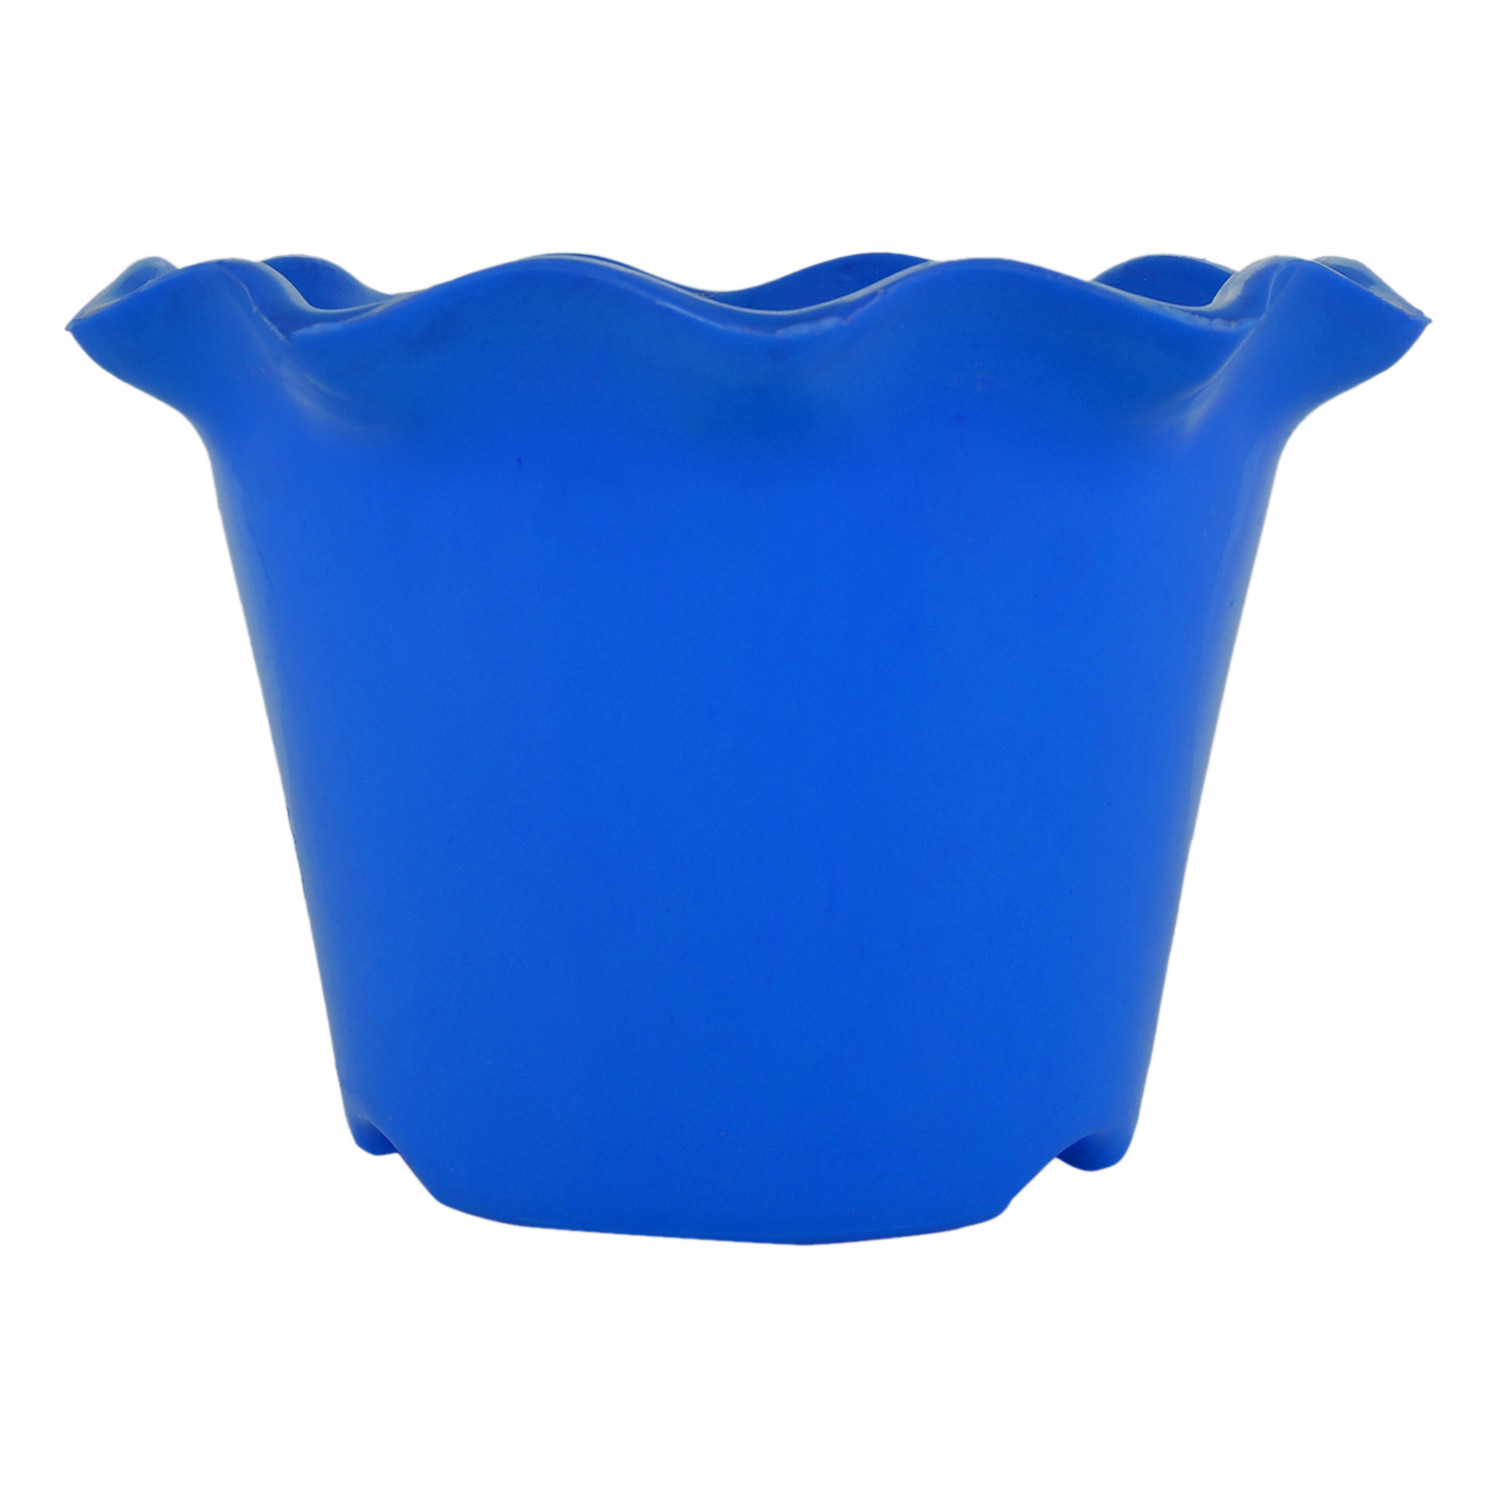 Kuber Industries Blossom Flower Pot|Durable Plastic Flower Pot|Gamla With Drain Holes for Home Décor|Balcony|Garden|8 Inch|Pack of 2 (Blue & Orange)